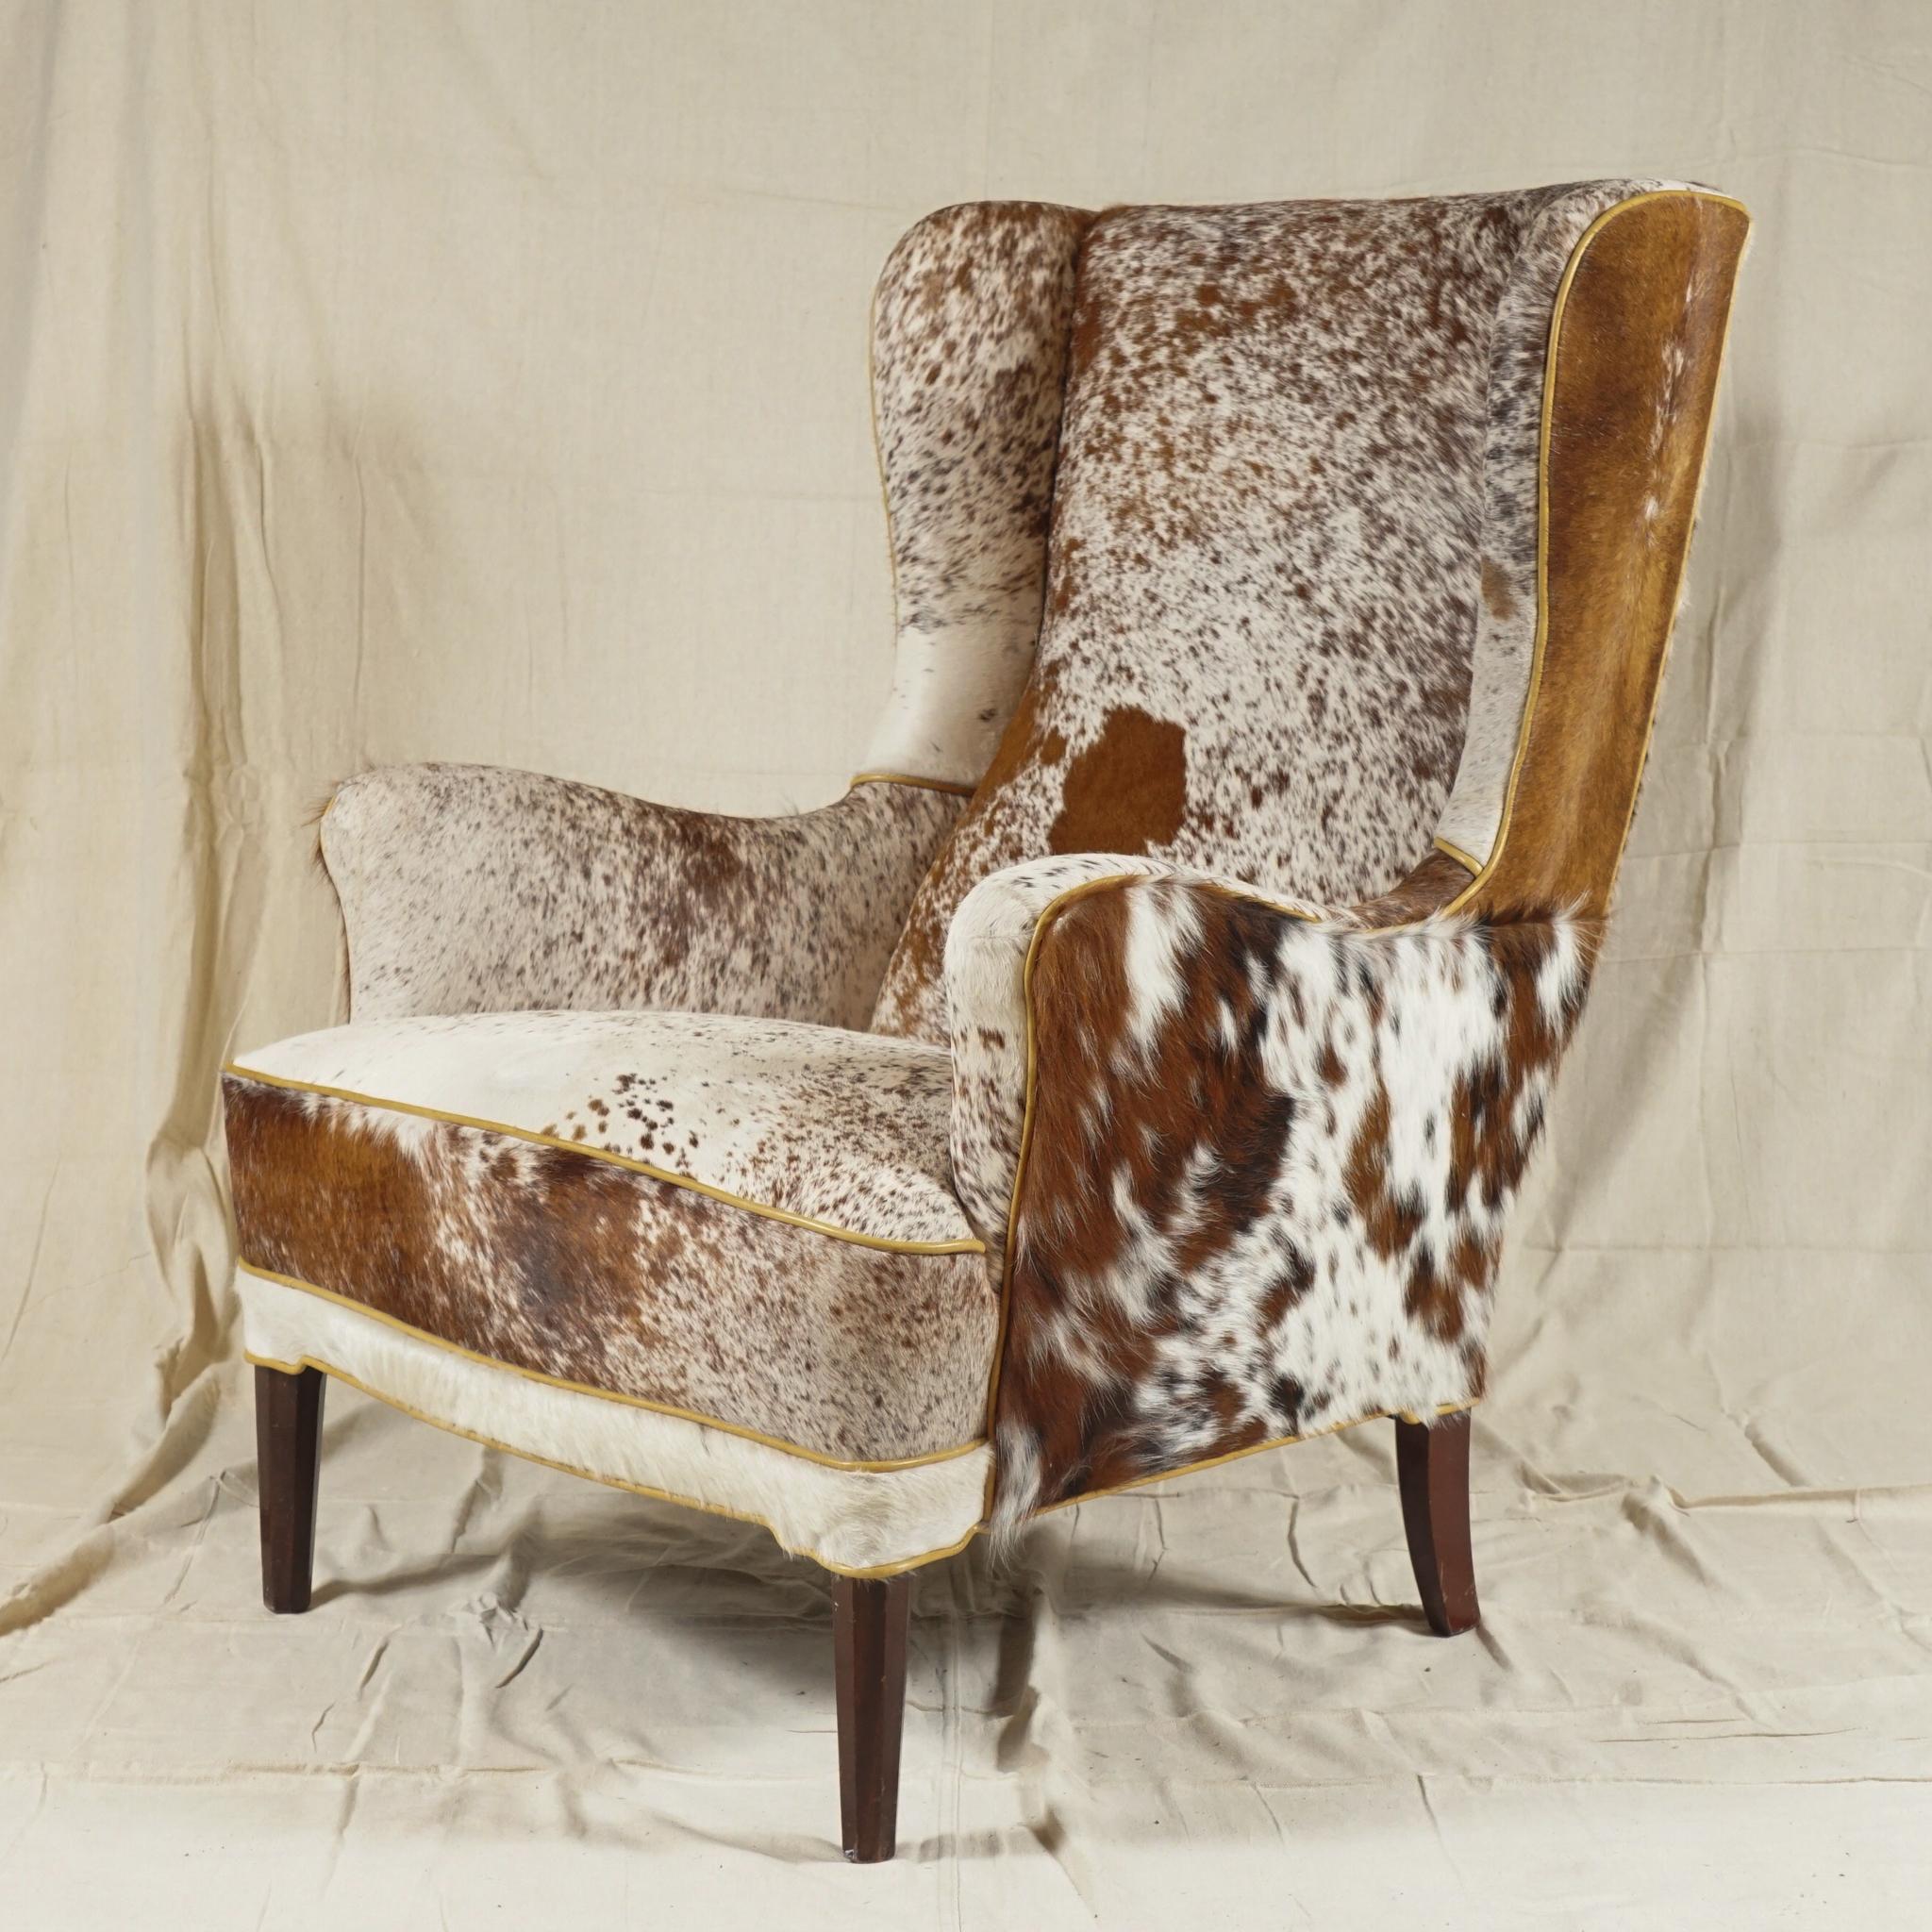 A Wingback Armchair by Danish designer Frits Henningsen, recovered in soft cowhide, extremely 
comfortable. A pair available.

Frits Henningsen (1889–1965) was a Danish furniture designer and cabinet maker who achieved high standards of quality